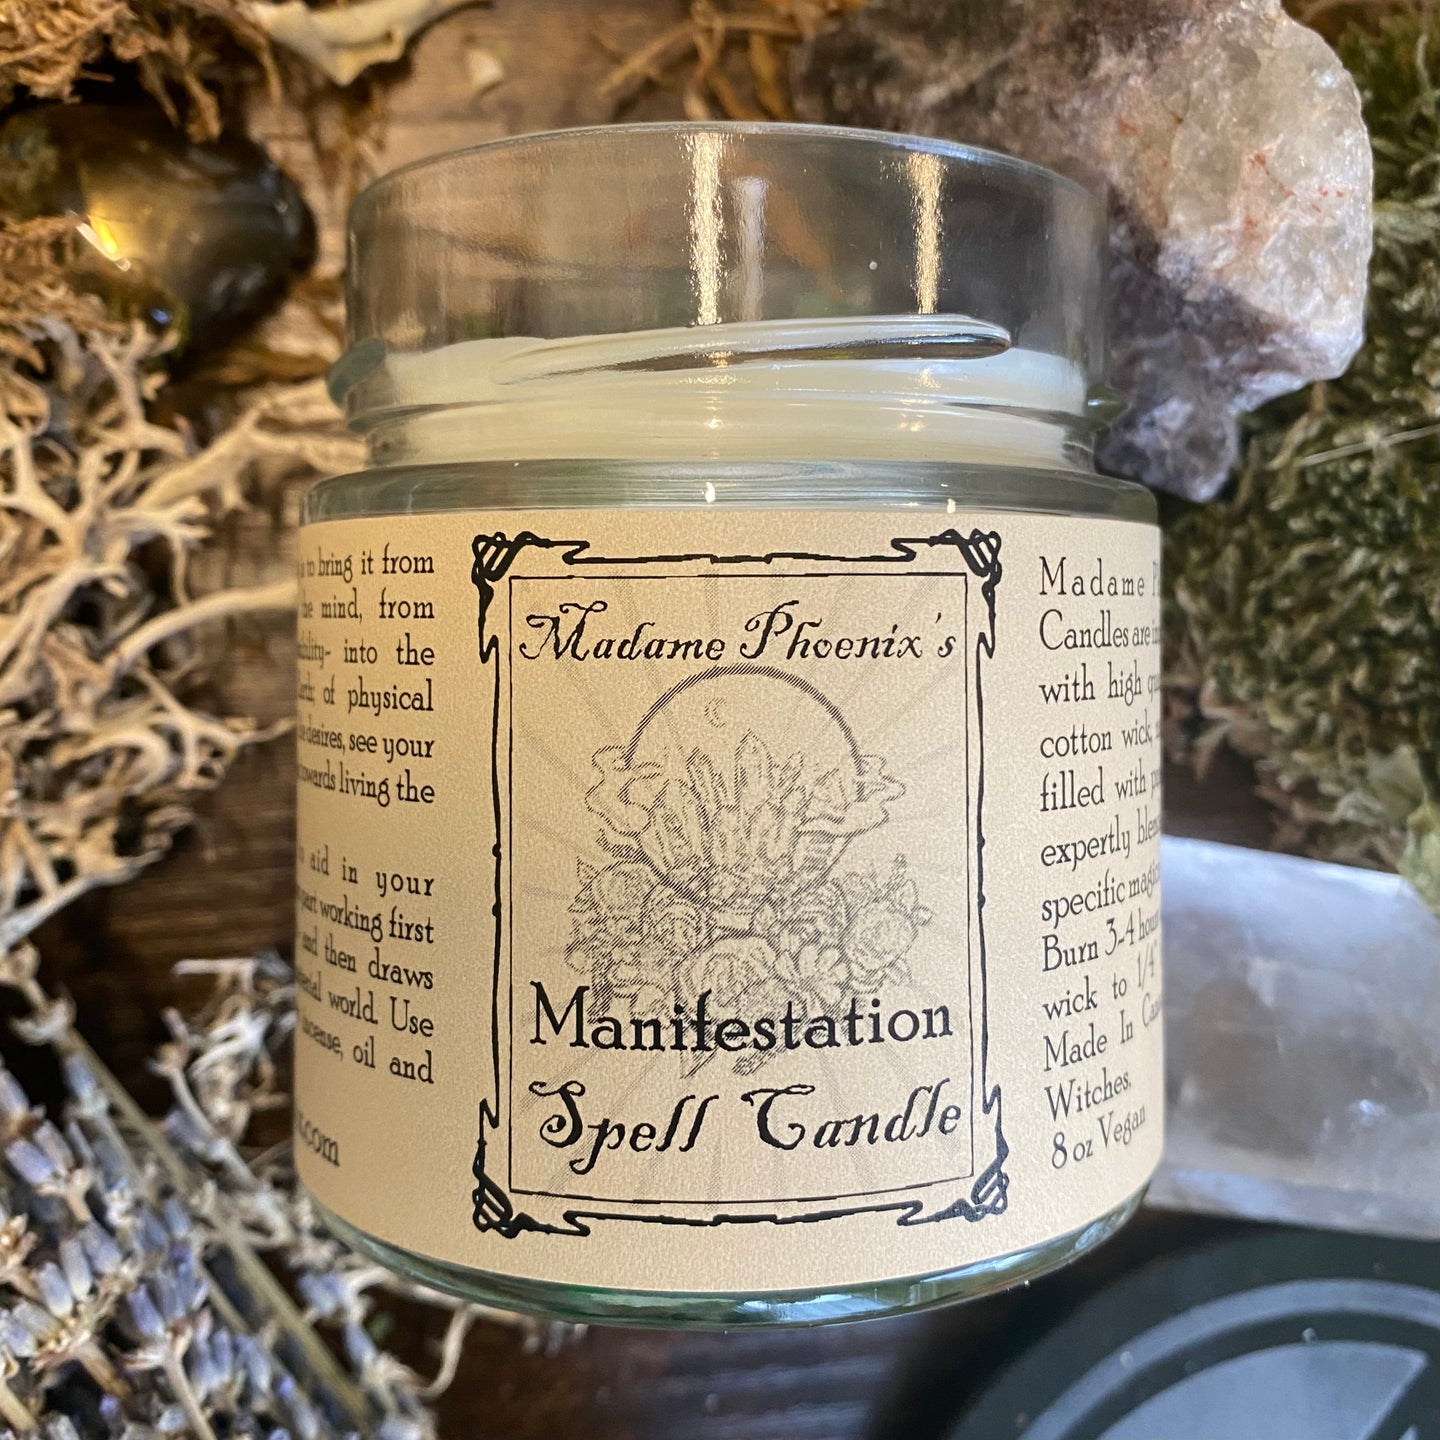 Manifestation Ritual Spell Candle